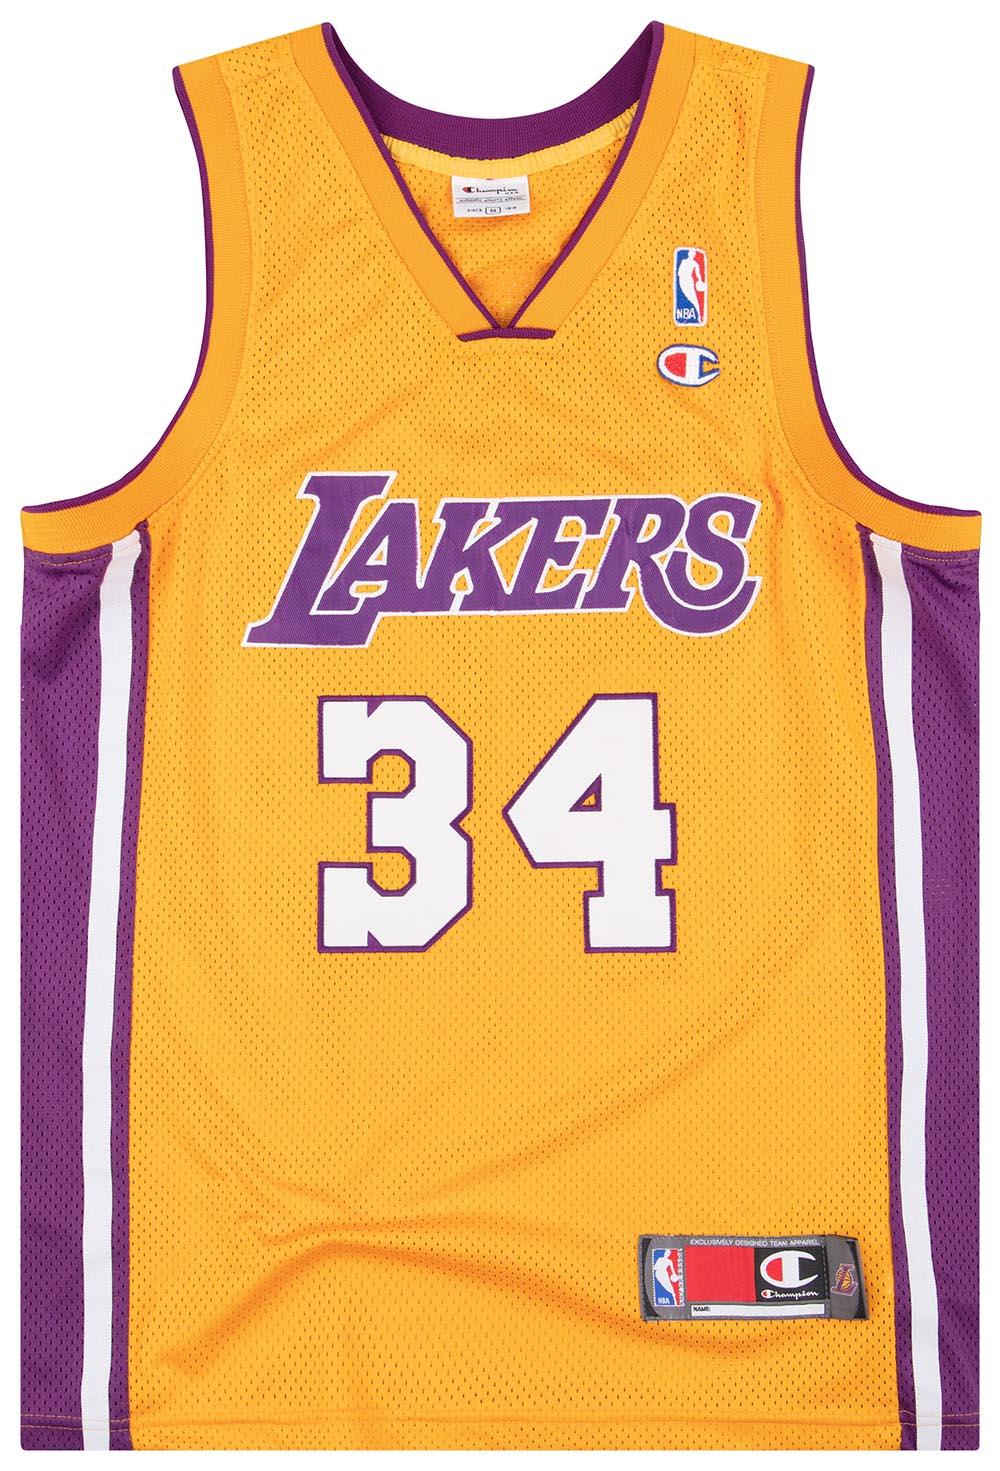 #9 lakers player